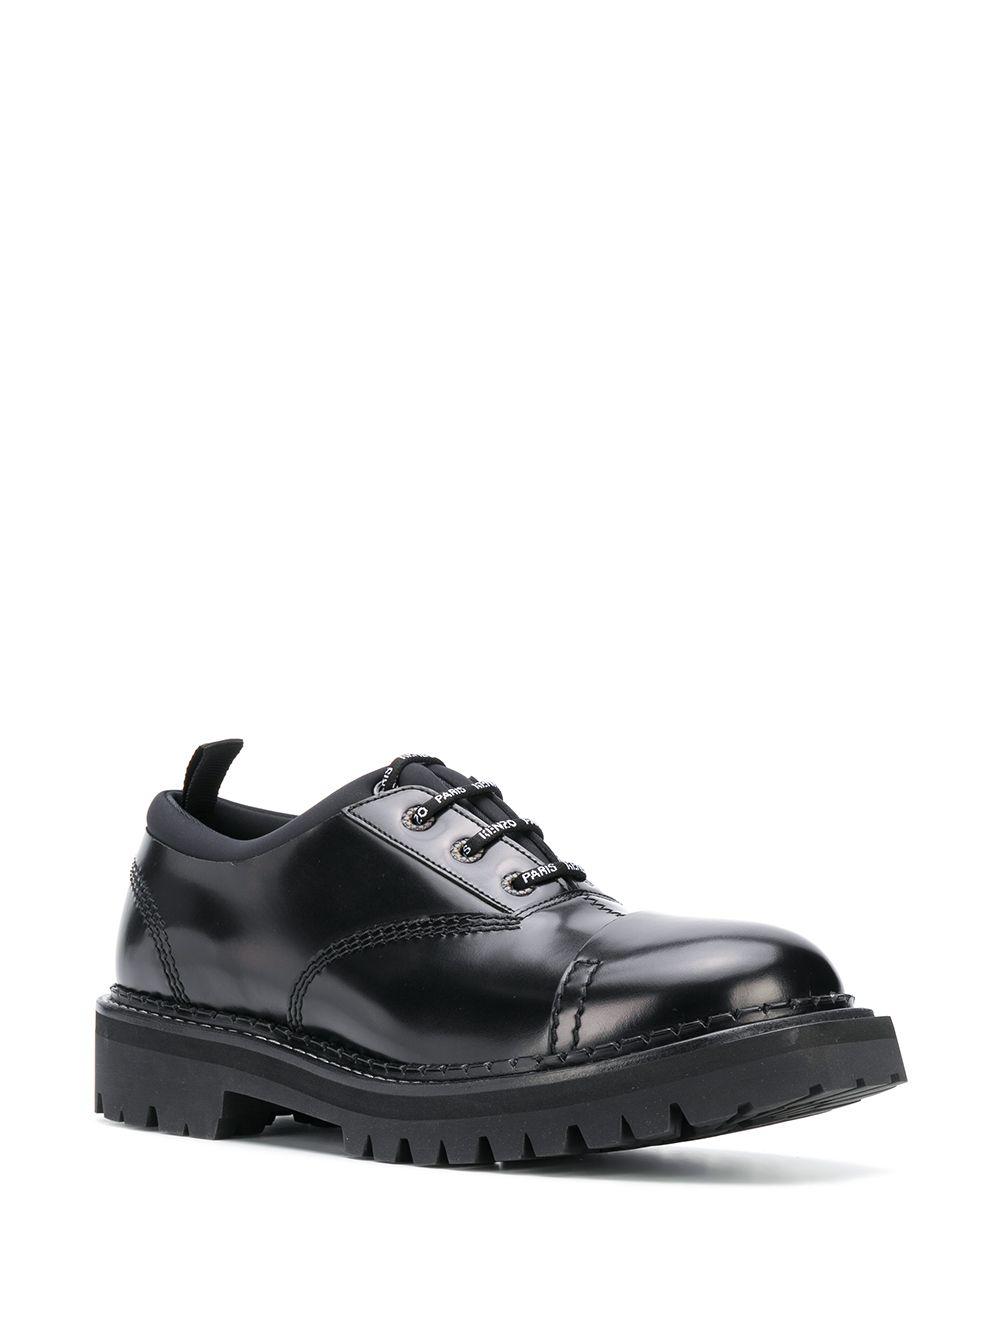 KENZO Leather Chunky Oxford Shoes in Black for Men - Lyst